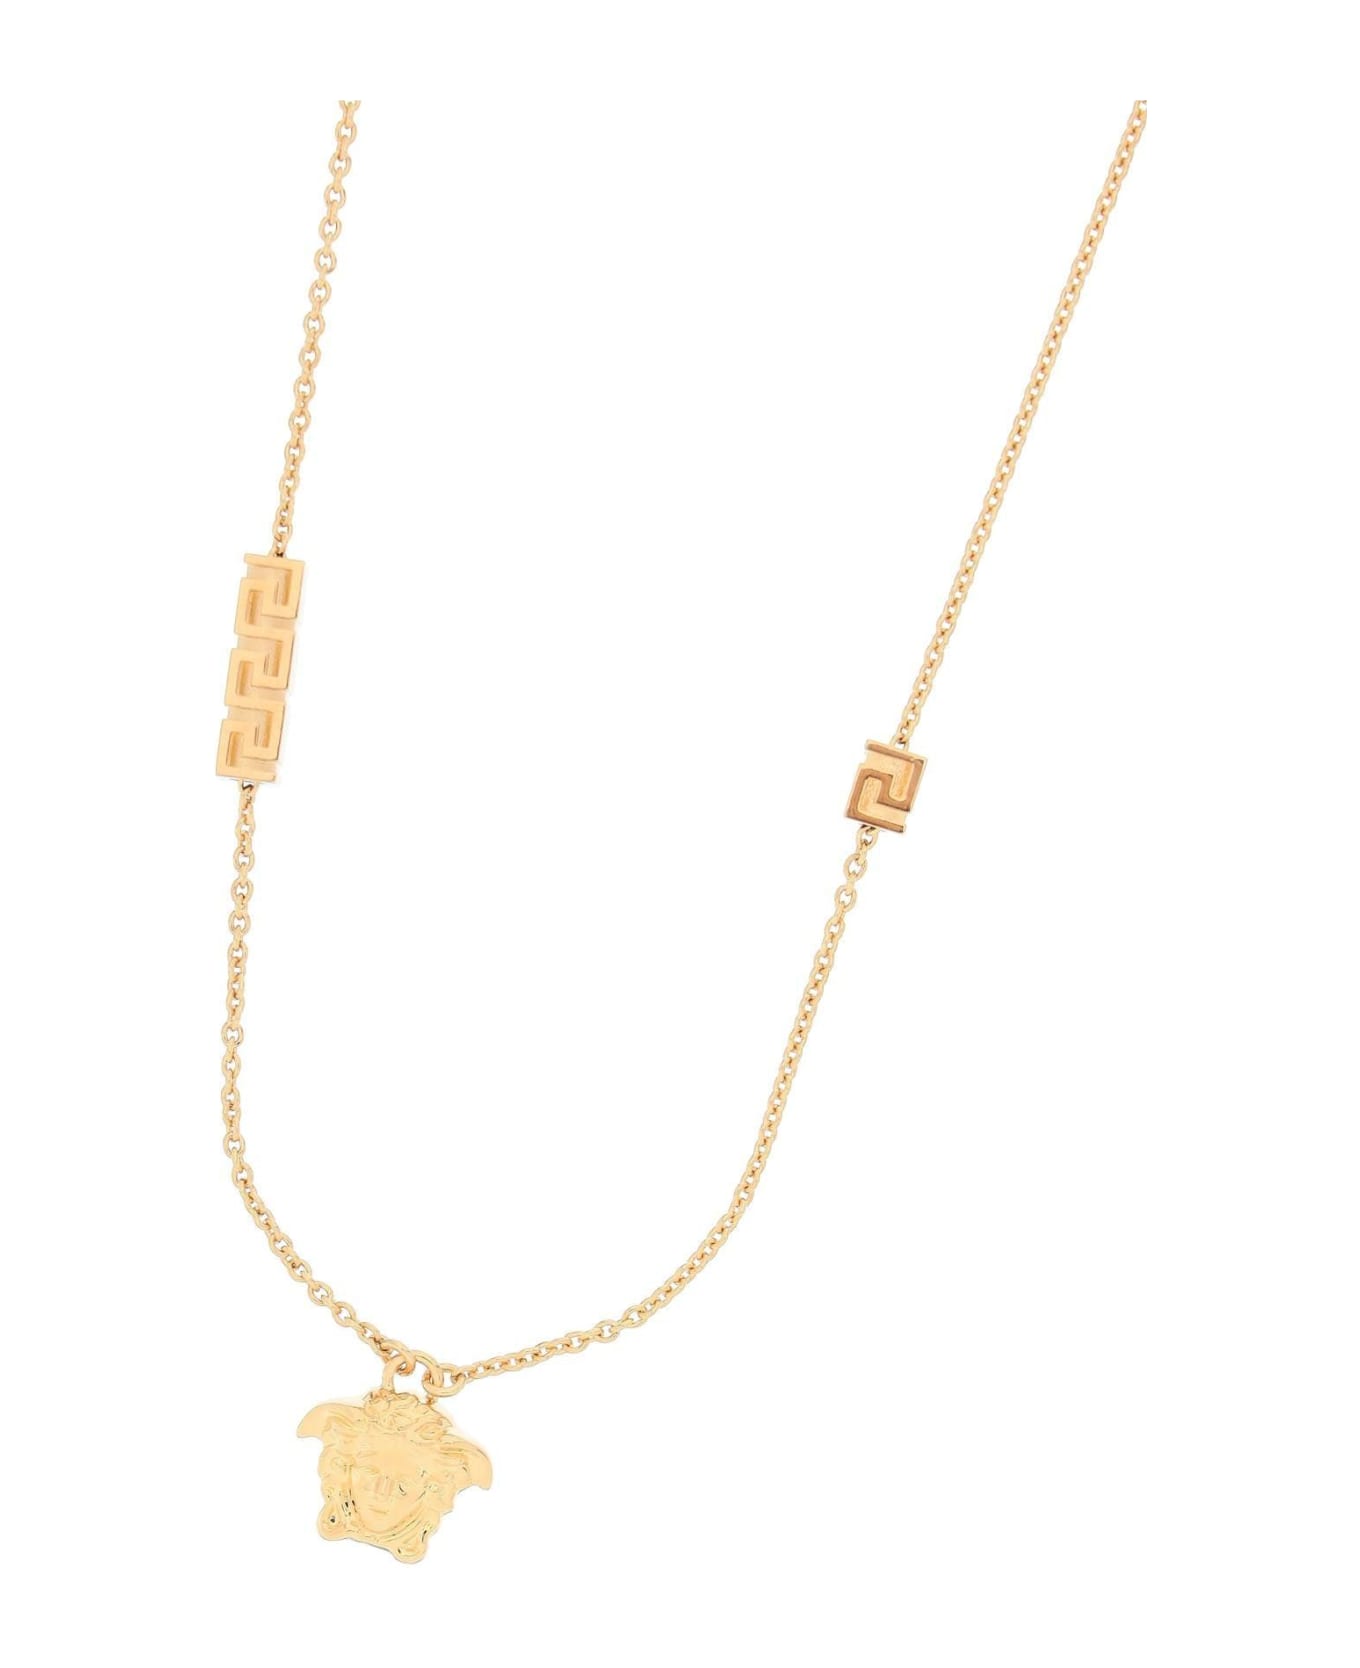 Versace Medusa Head Chained Necklace - Giallo